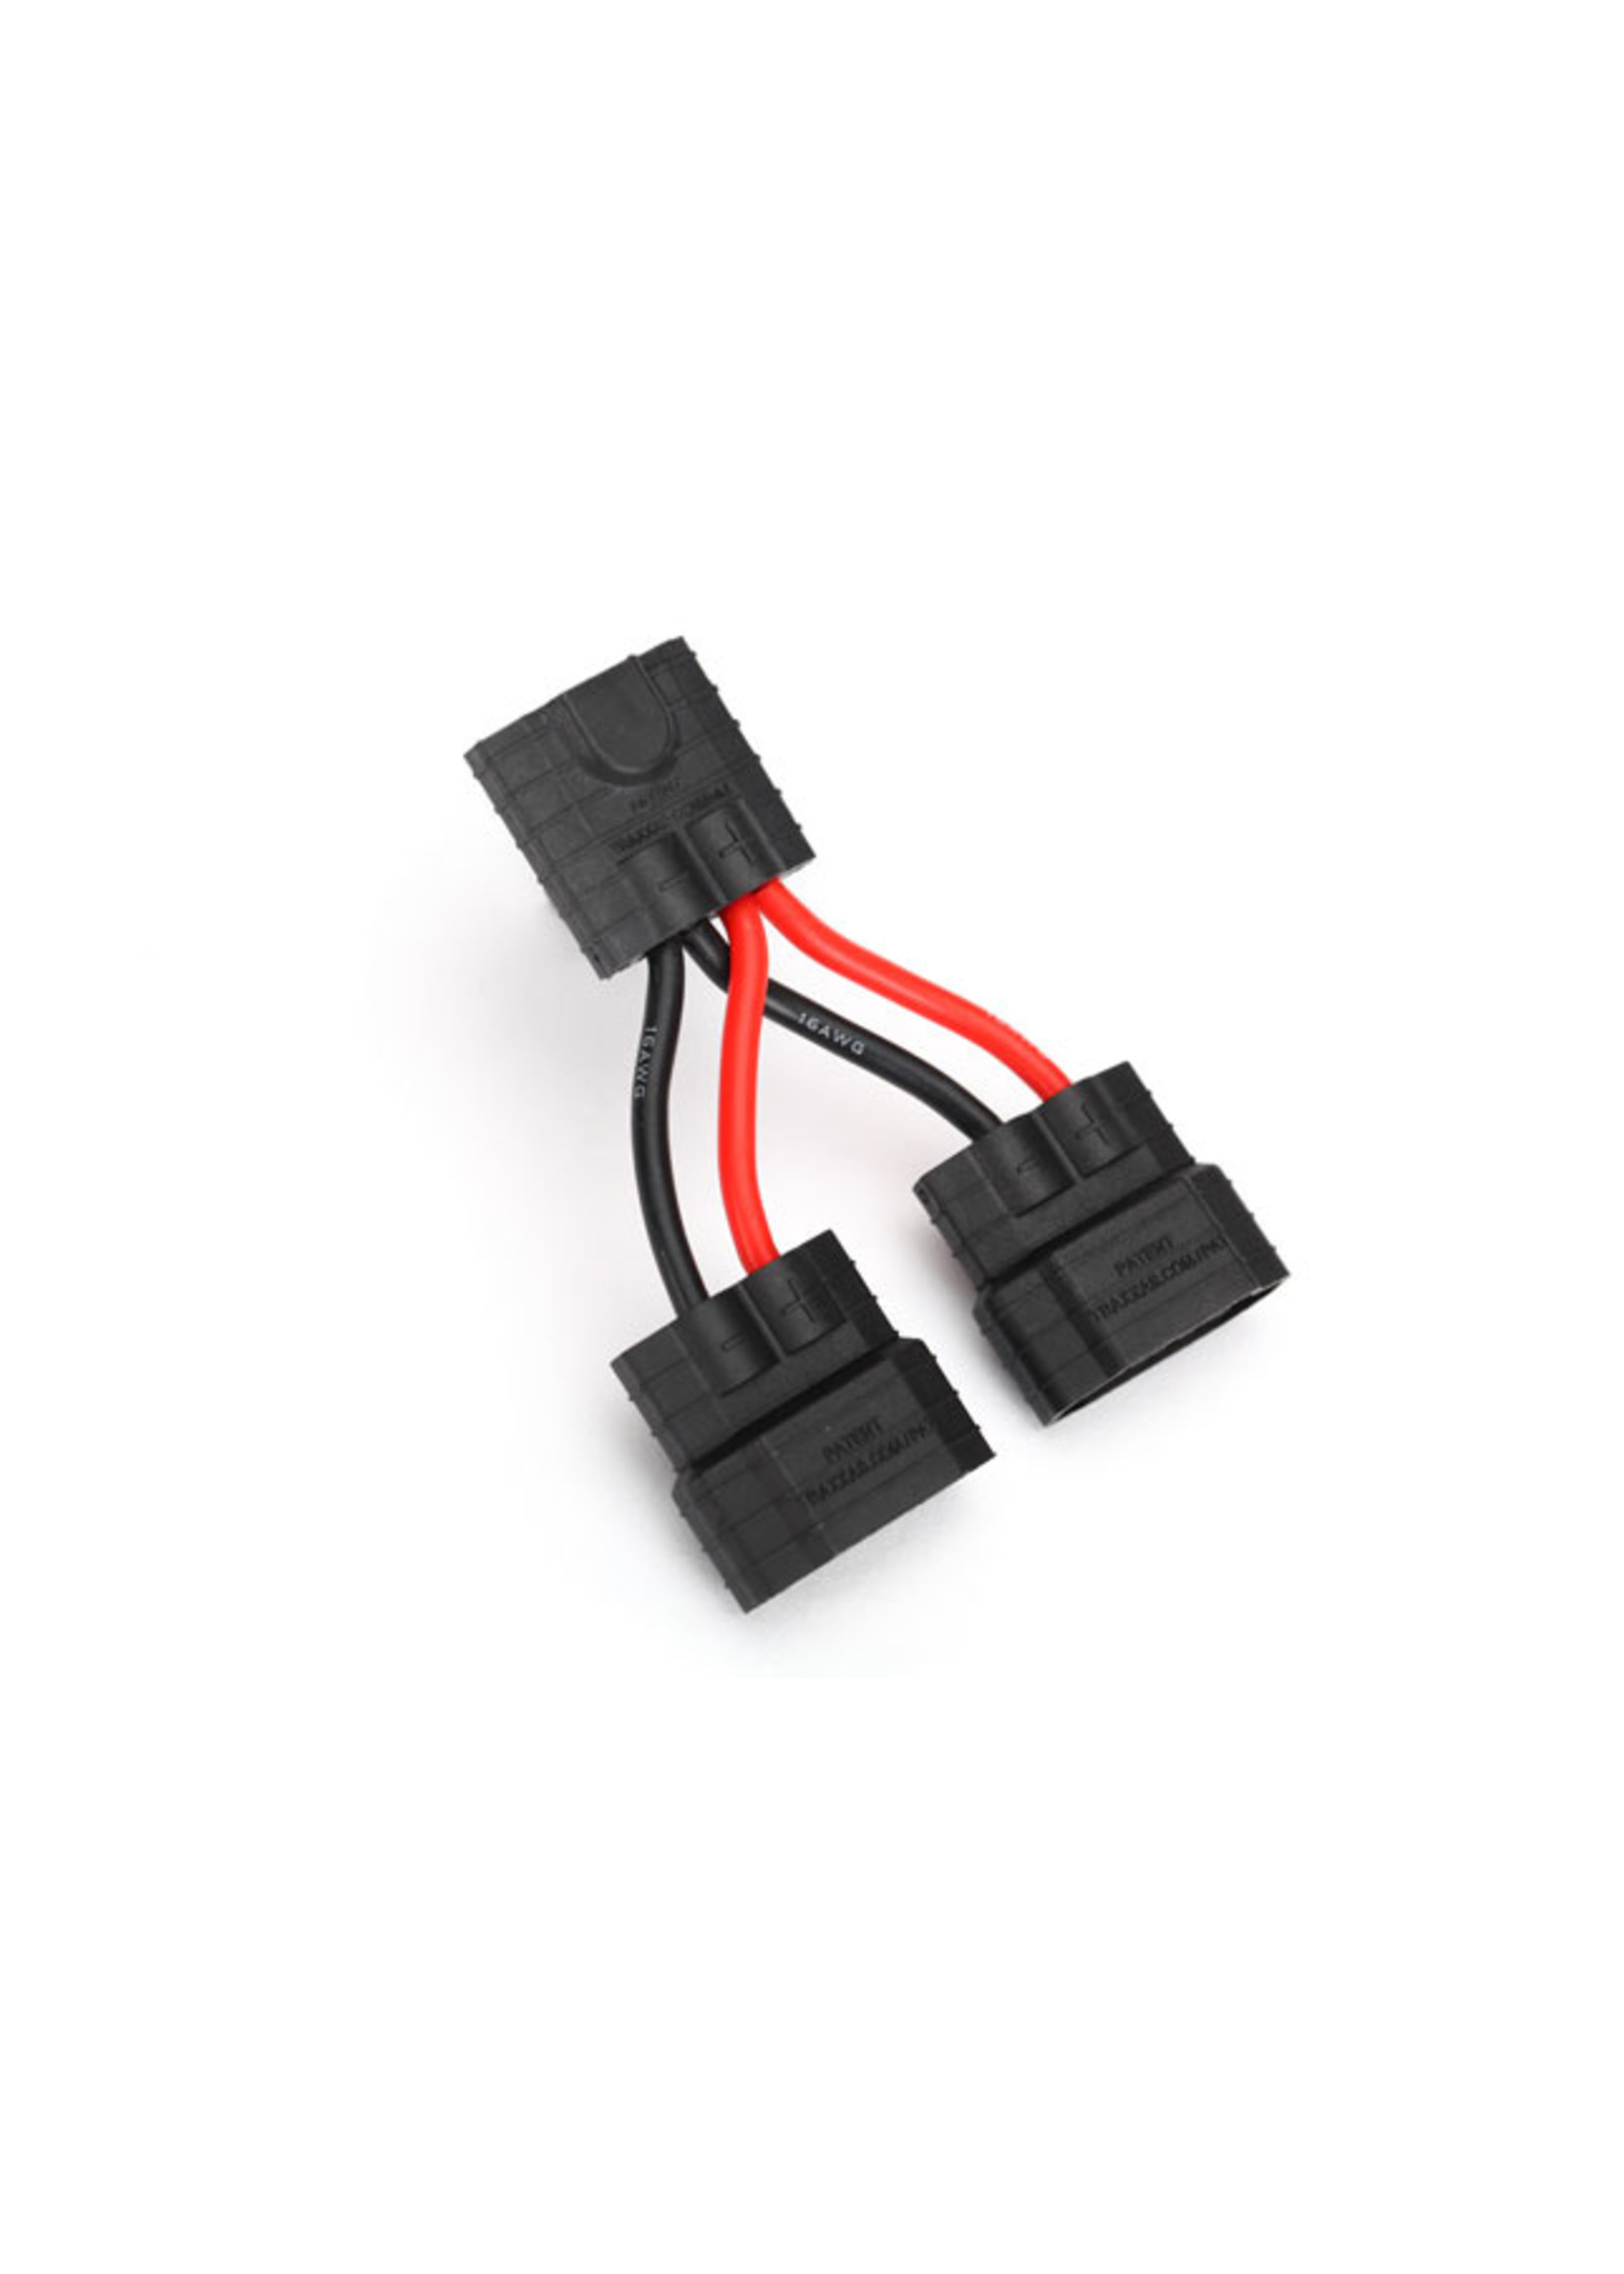 Traxxas 3064X - Parallel Battery Wire Harness (Traxxas ID)